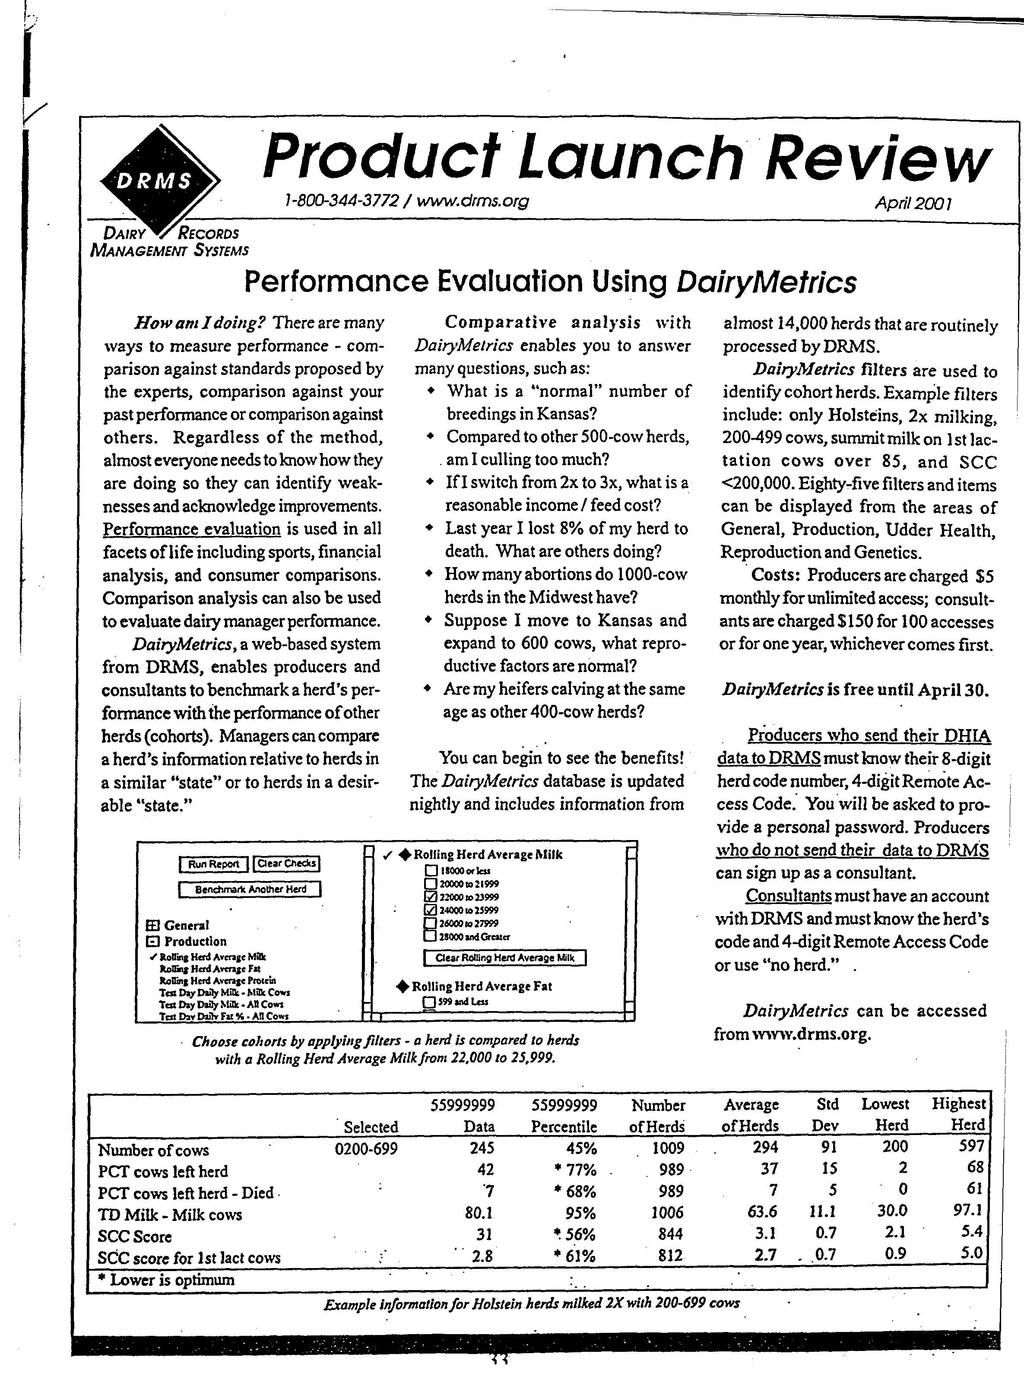 Product Launch Revie w 1-800-344-3772 / www.drms.org April 200 1 DAIRY /RECORD S MANAGEMENT SYSTEMS Performance Evaluation Using DairyMetrics How am I doing?